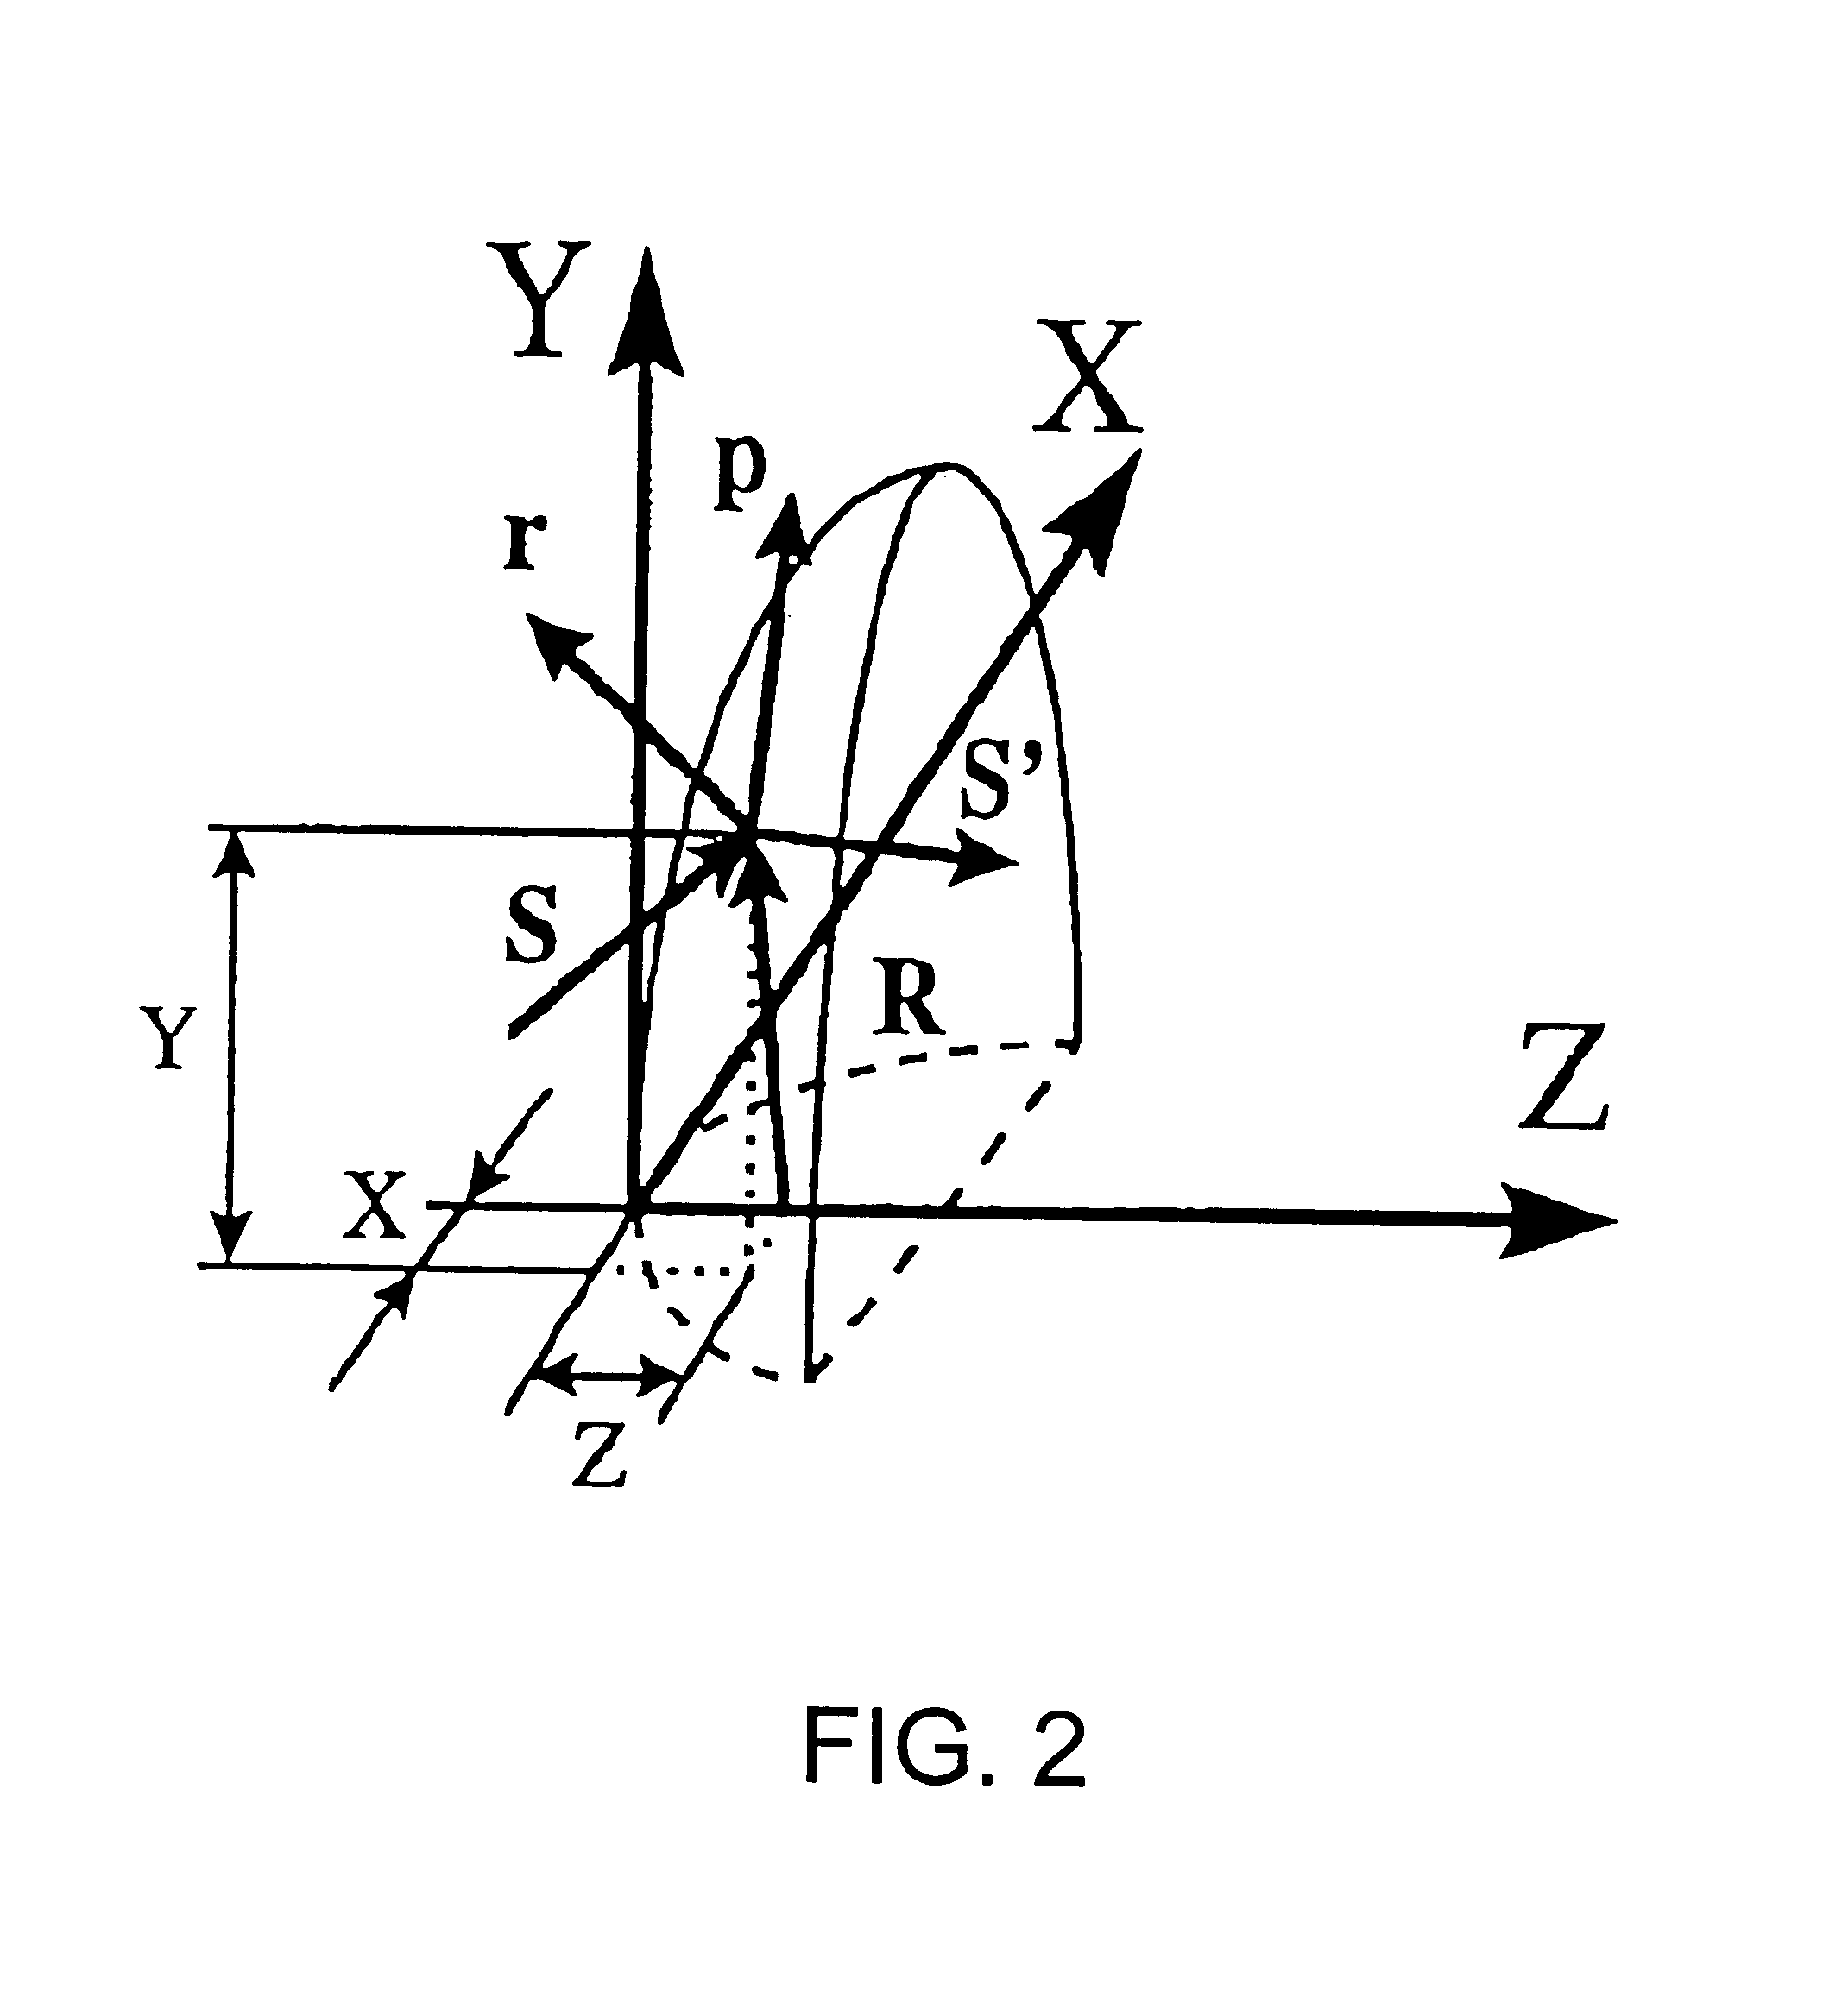 Optical systems employing stepped diffractive surfaces